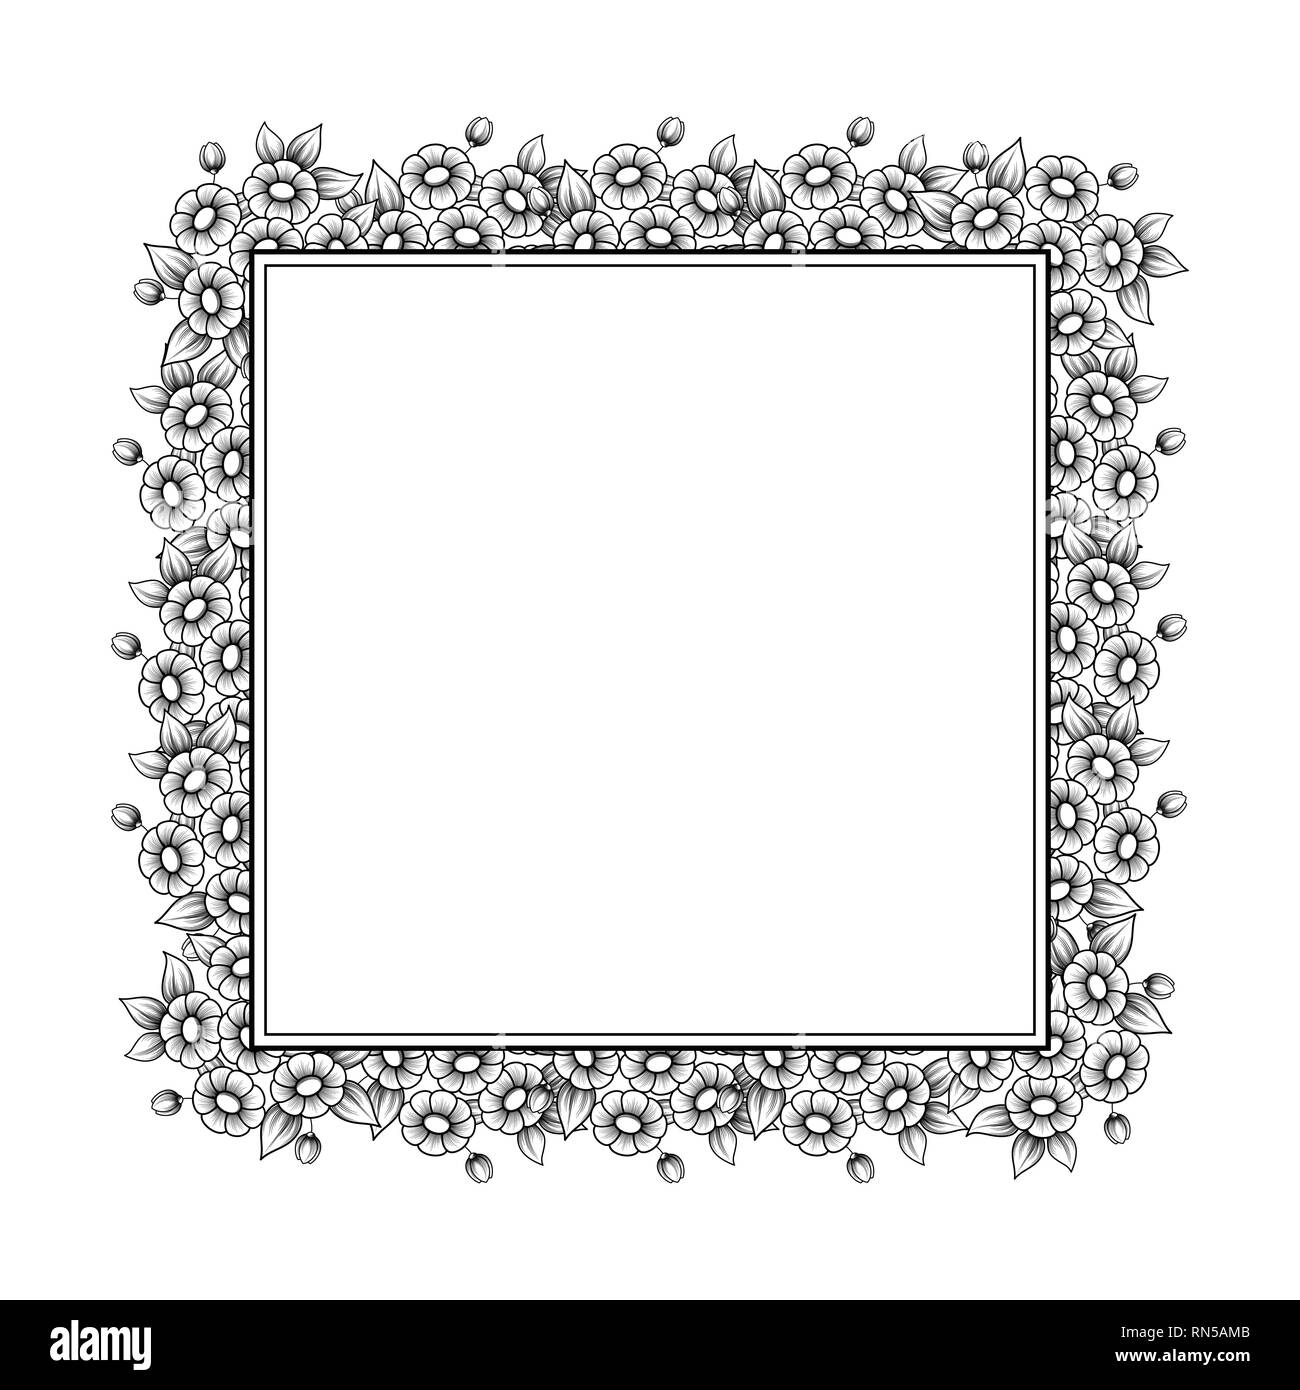 Black and white daisy floral bouquetes in square frame shape Stock Vector